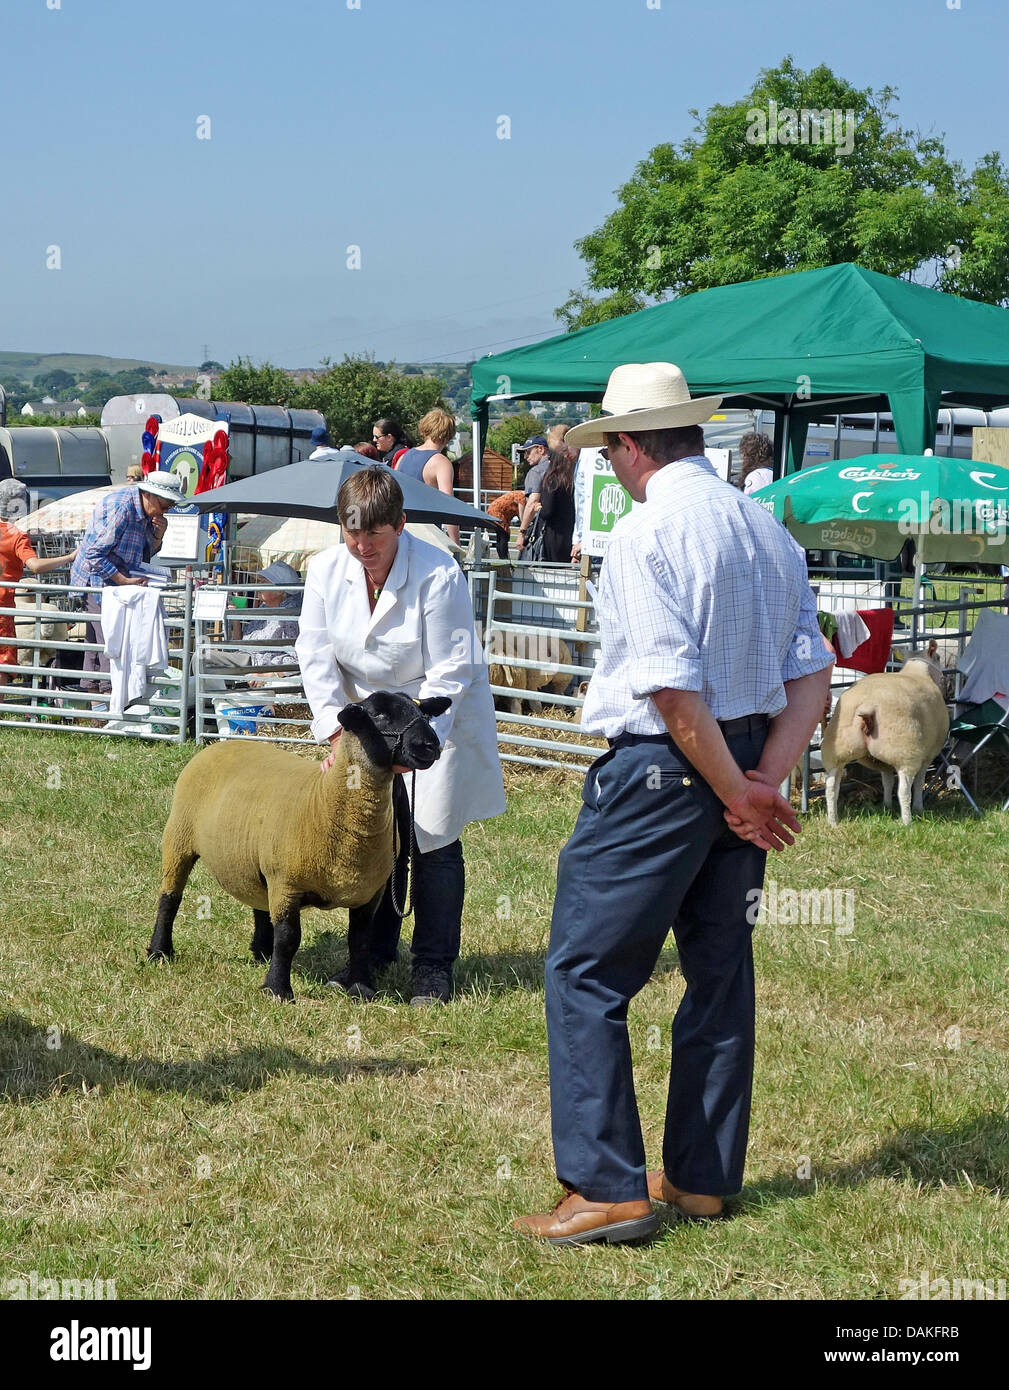 Judging suffolk sheep at the stithians agriculture and farming show in cornwall, uk Stock Photo